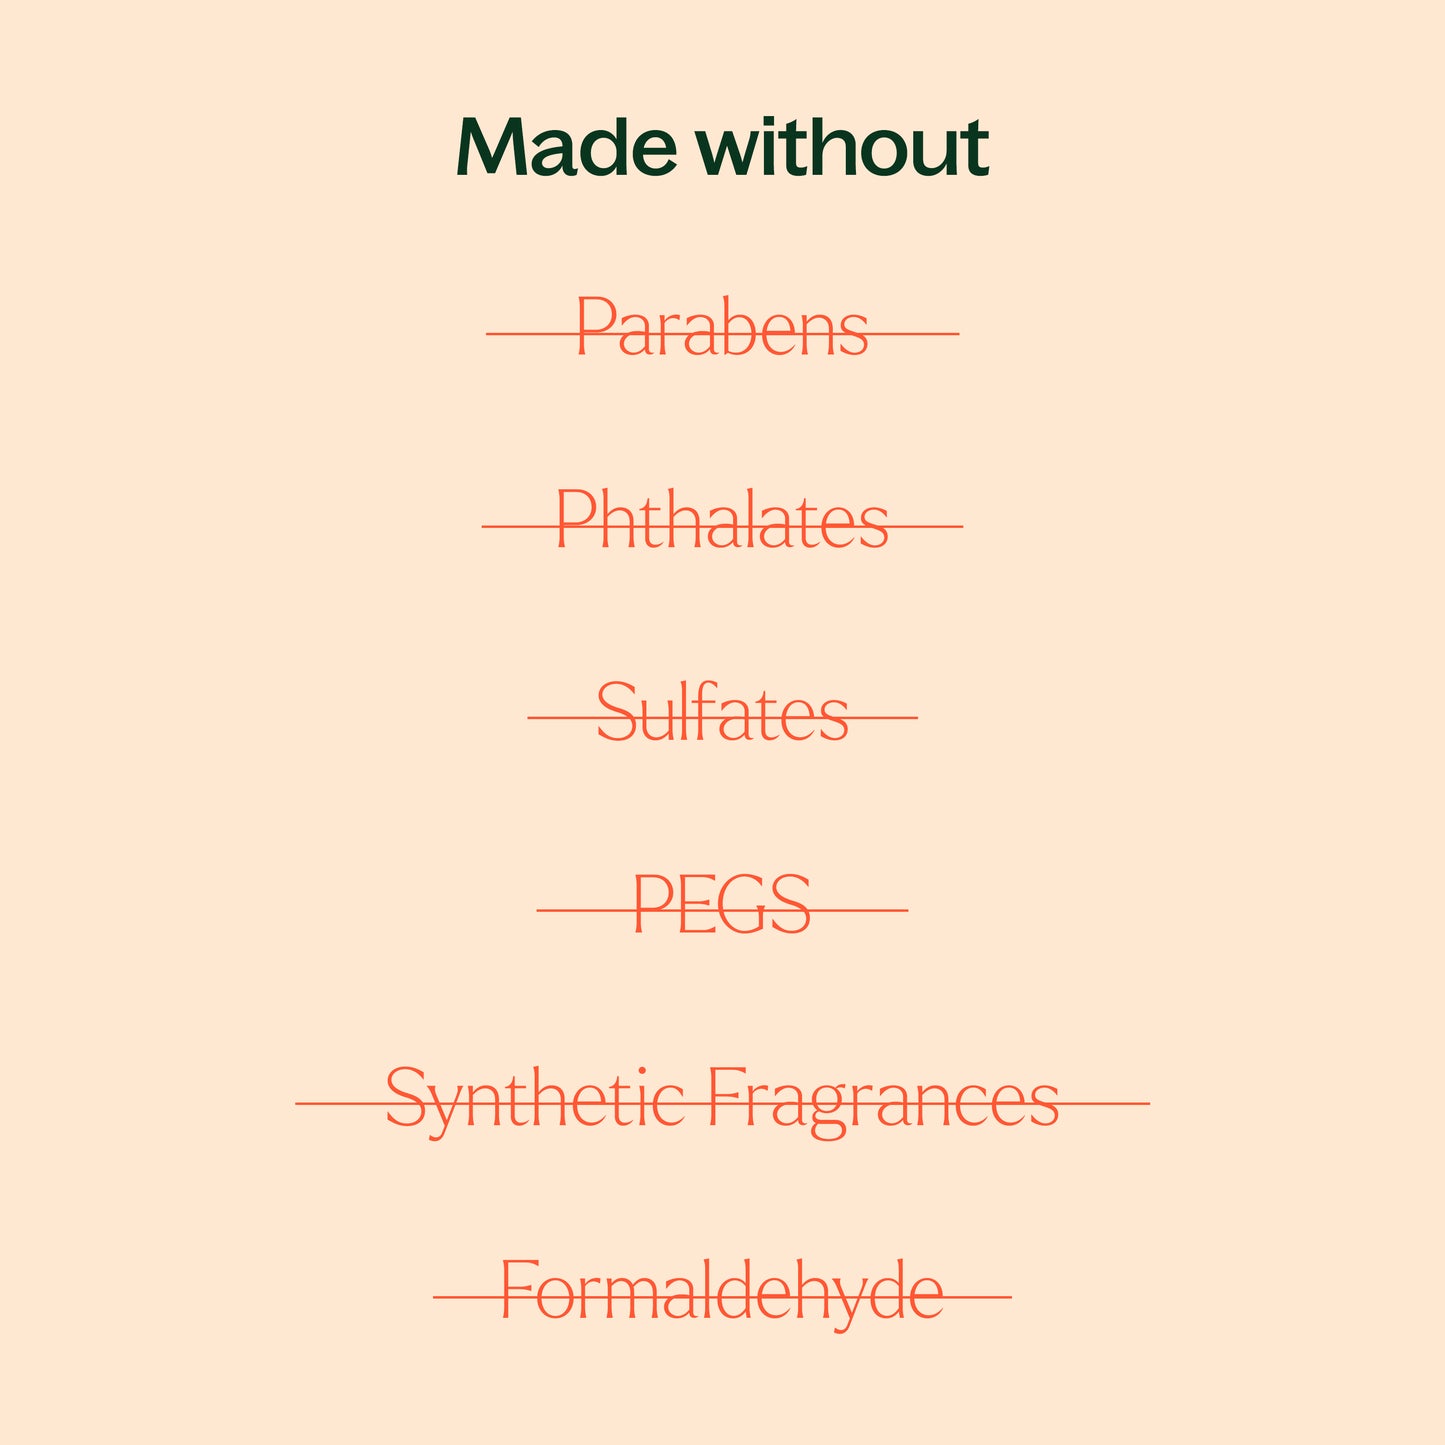 made without phthalates, sulfates, synthetic fragrances, formaldehyde, PEGs